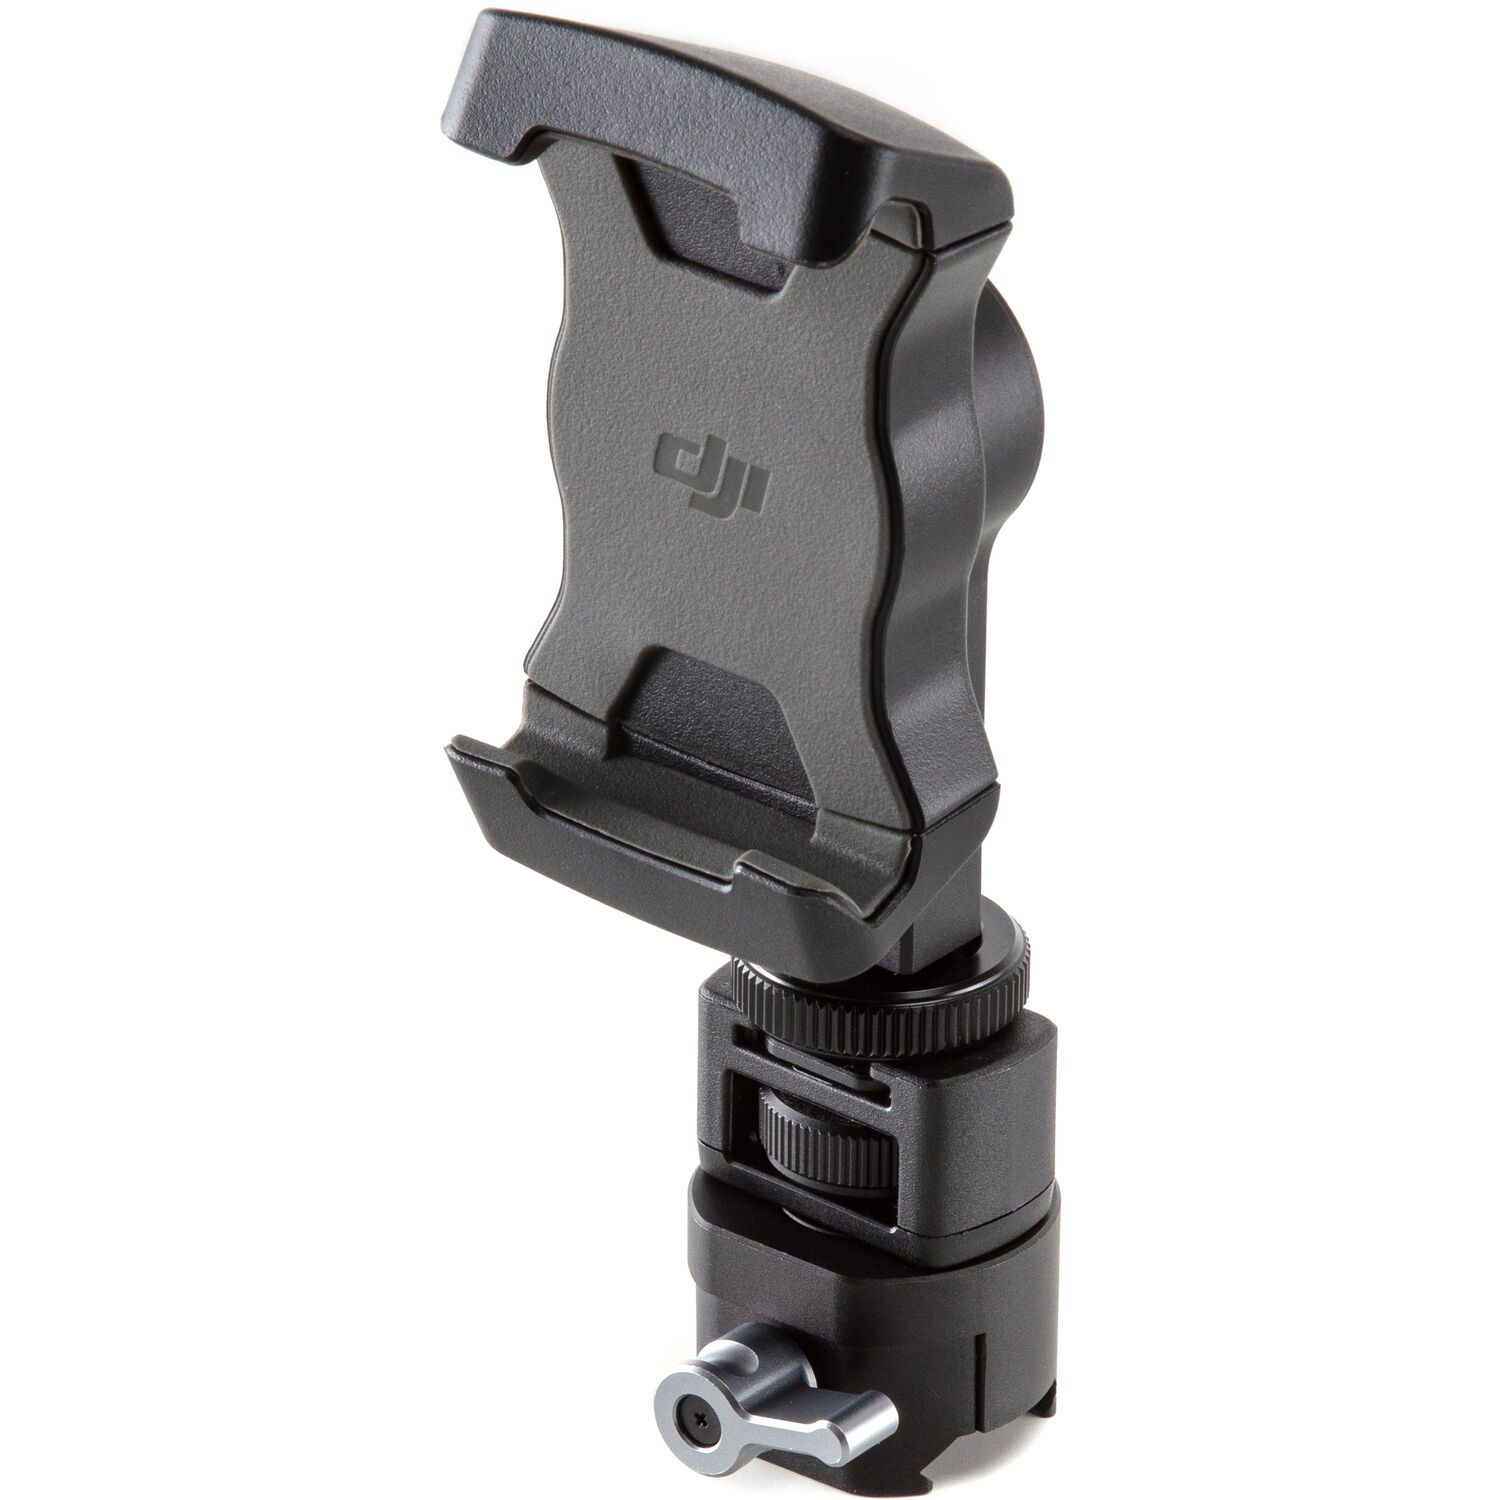 DJI - Phone Holder for RS 2 and RSC 2